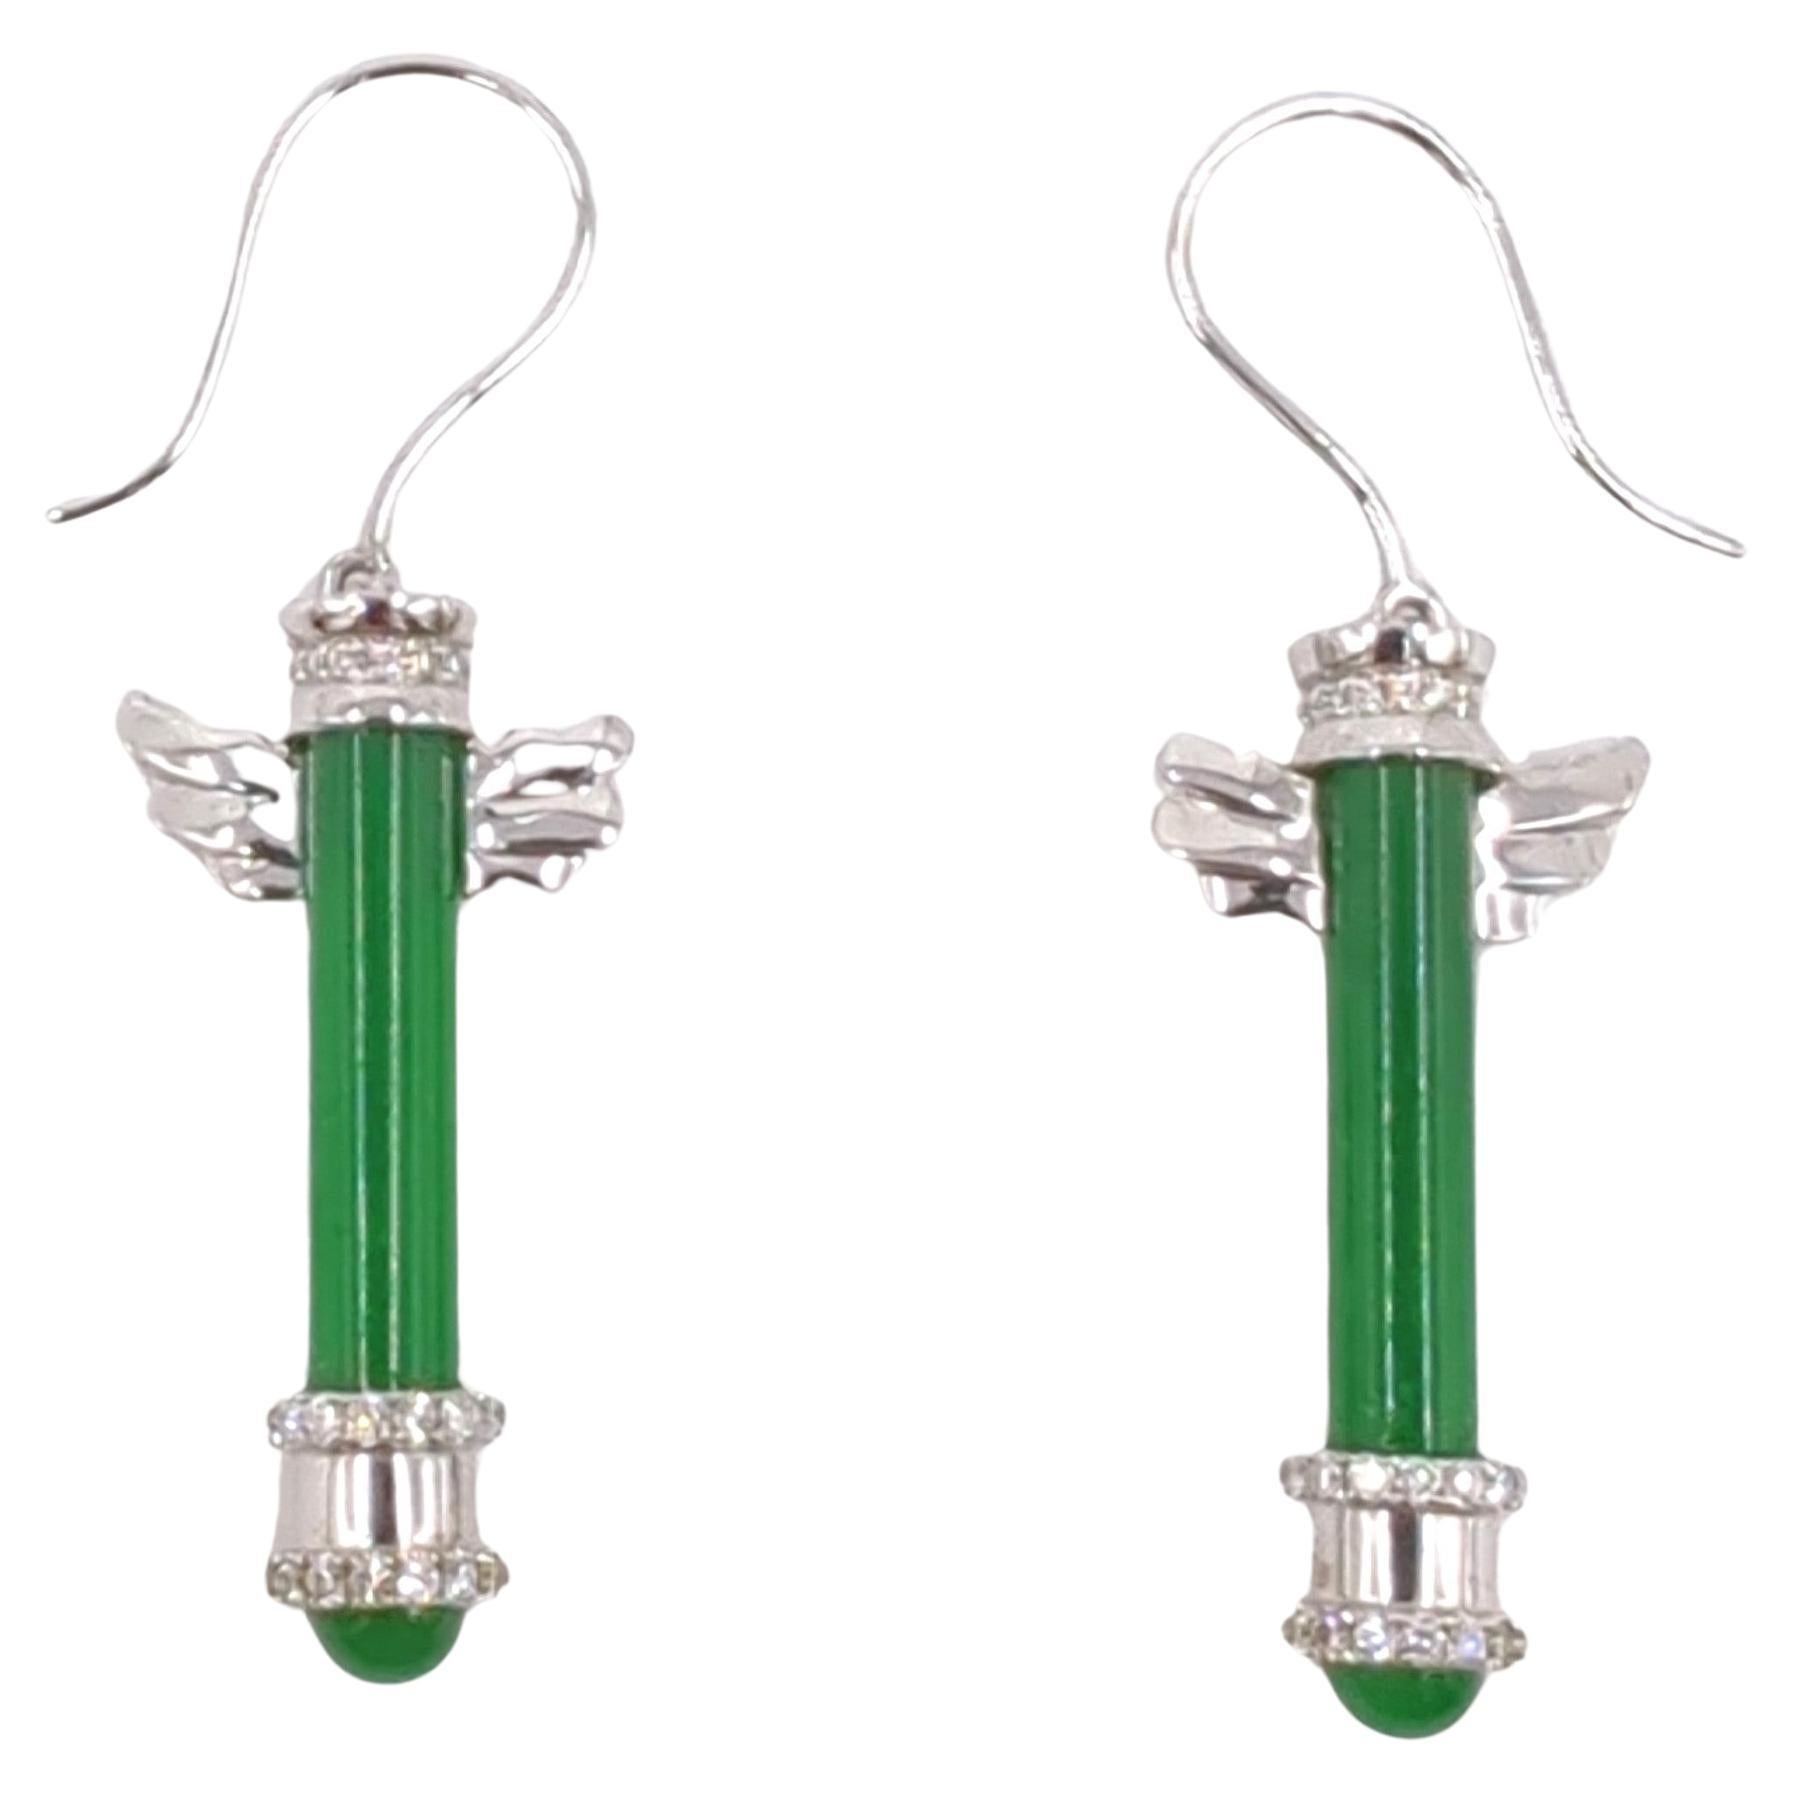 This exceptional pair of earrings is a masterful blend of artistry and luxury, meticulously crafted in white gold and weighing 7.10 grams. The earrings feature four high-quality emerald green jadeite stones—two in pole green and two in cabochon